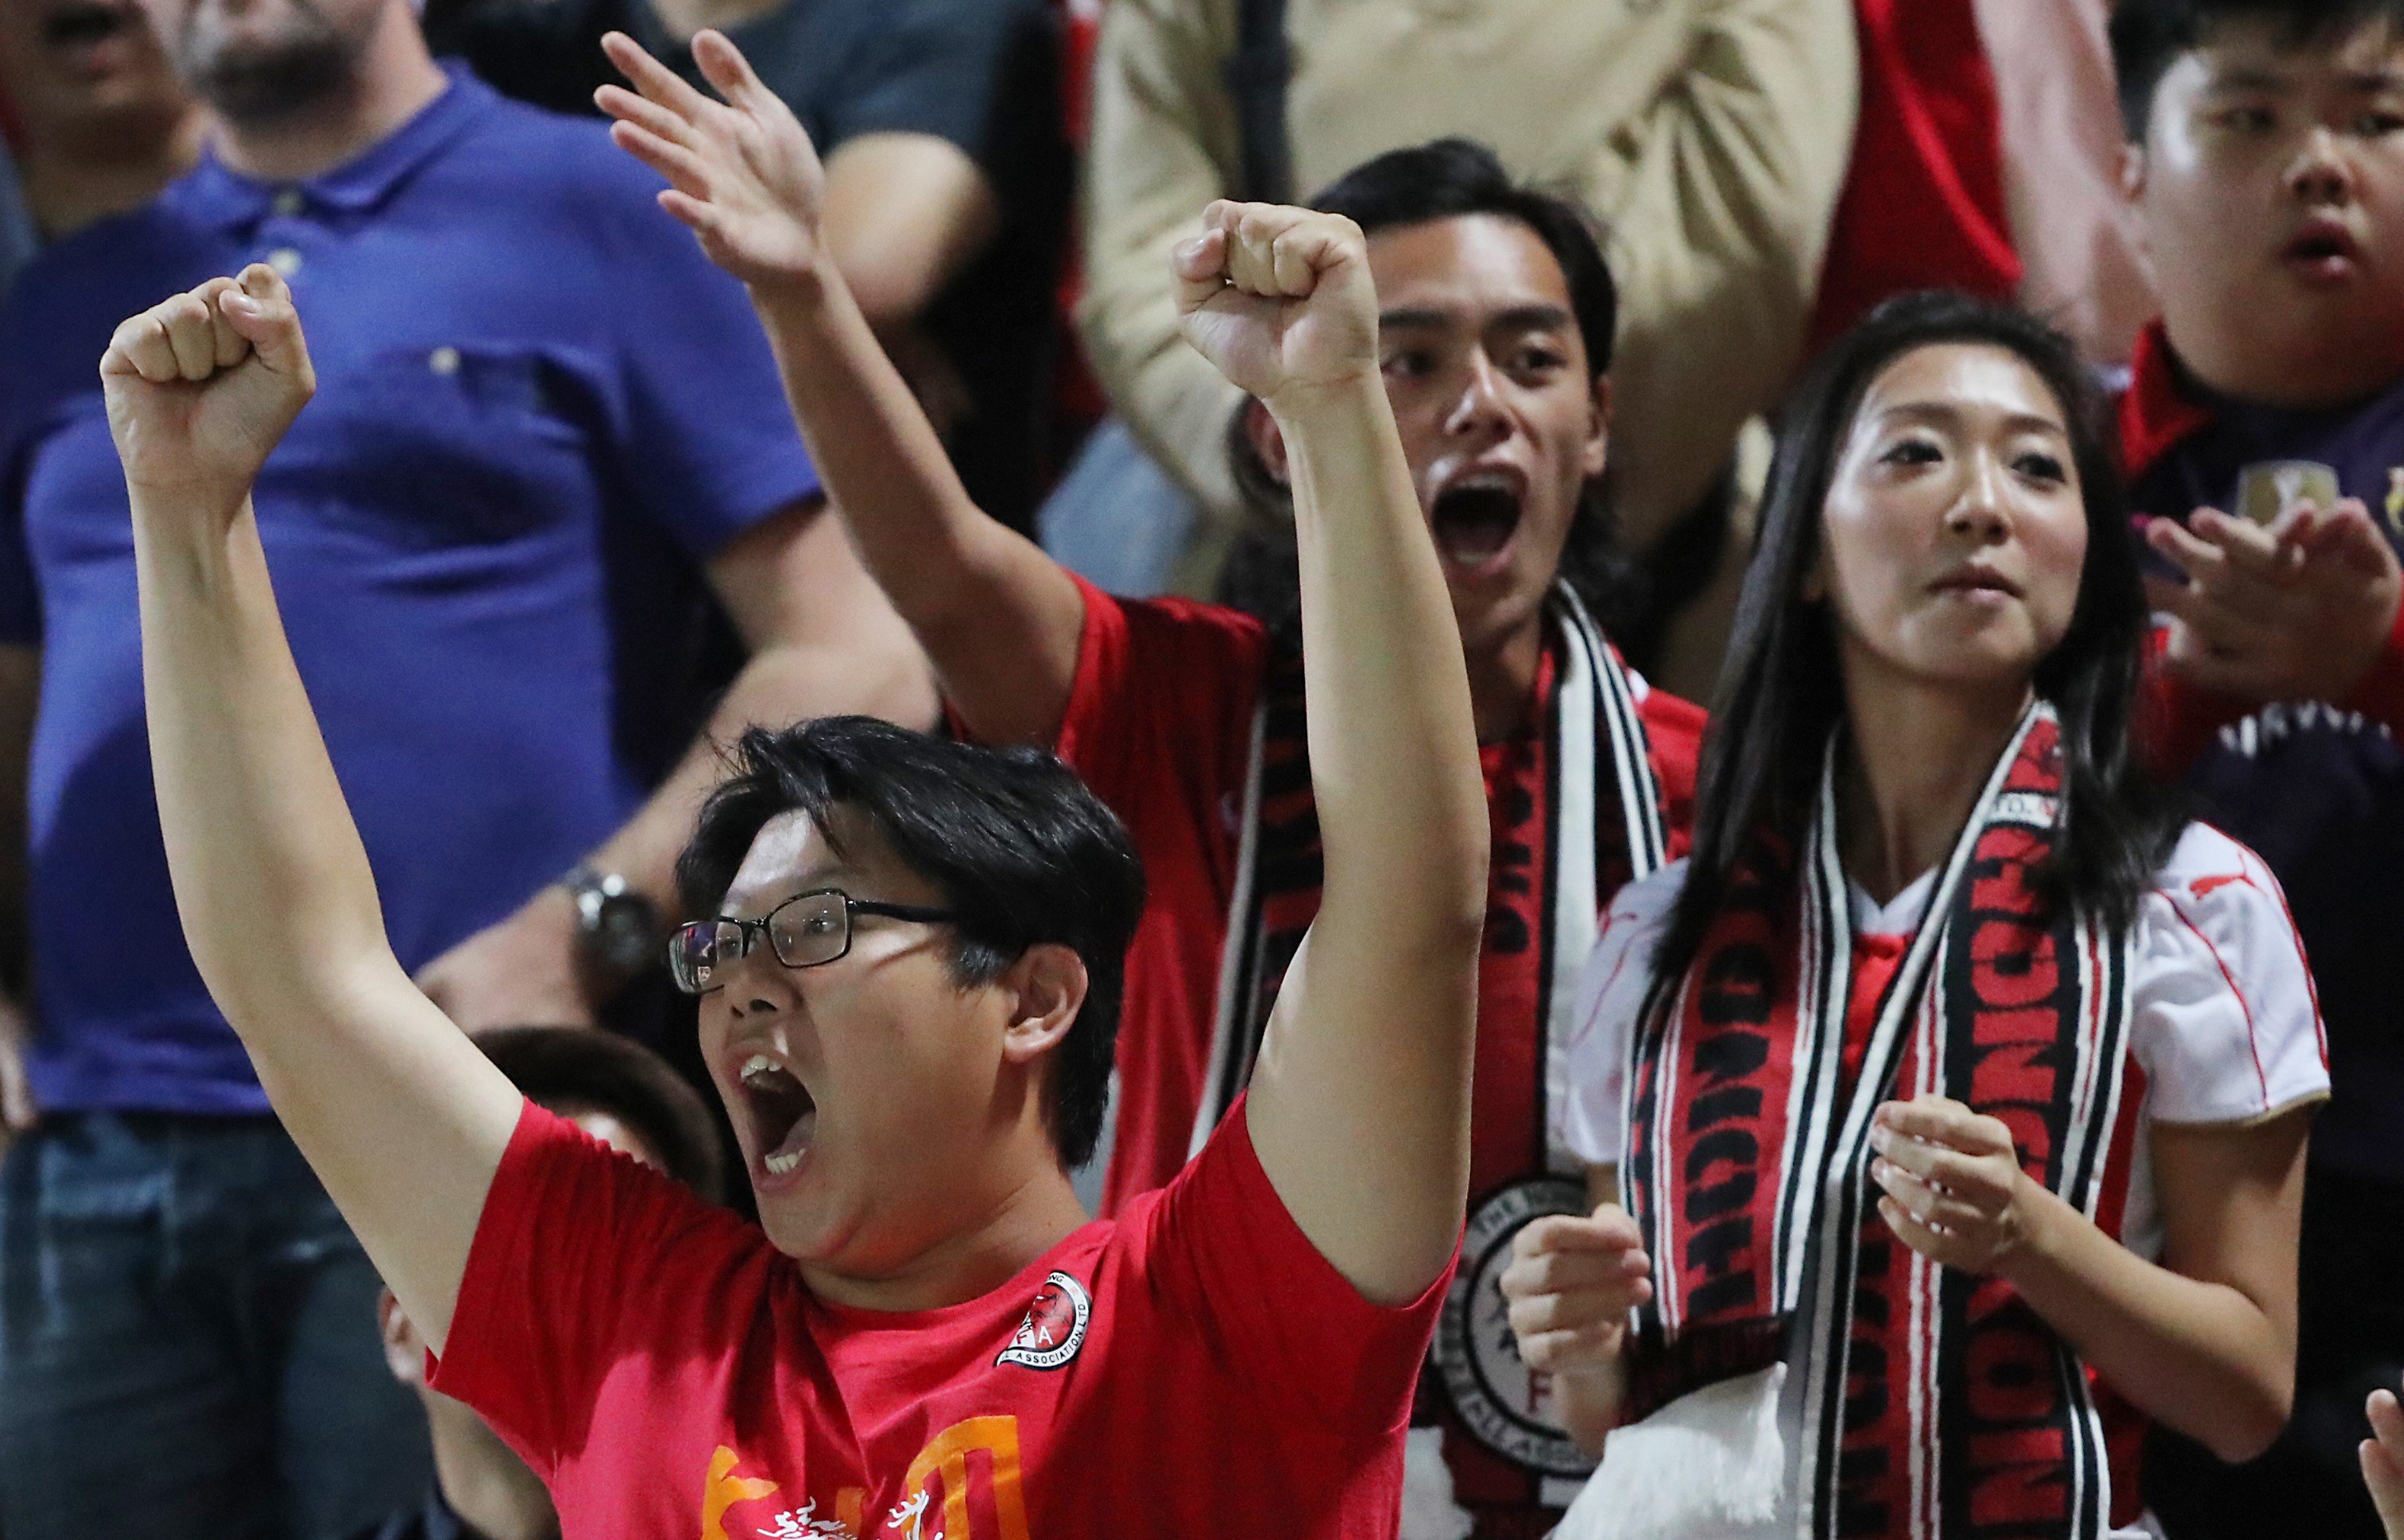 Hong Kong fans won’t get much of a chance to see their team in action against North Korea in the crucial AFC Asian Cup qualifier. Photo: Edward Wong